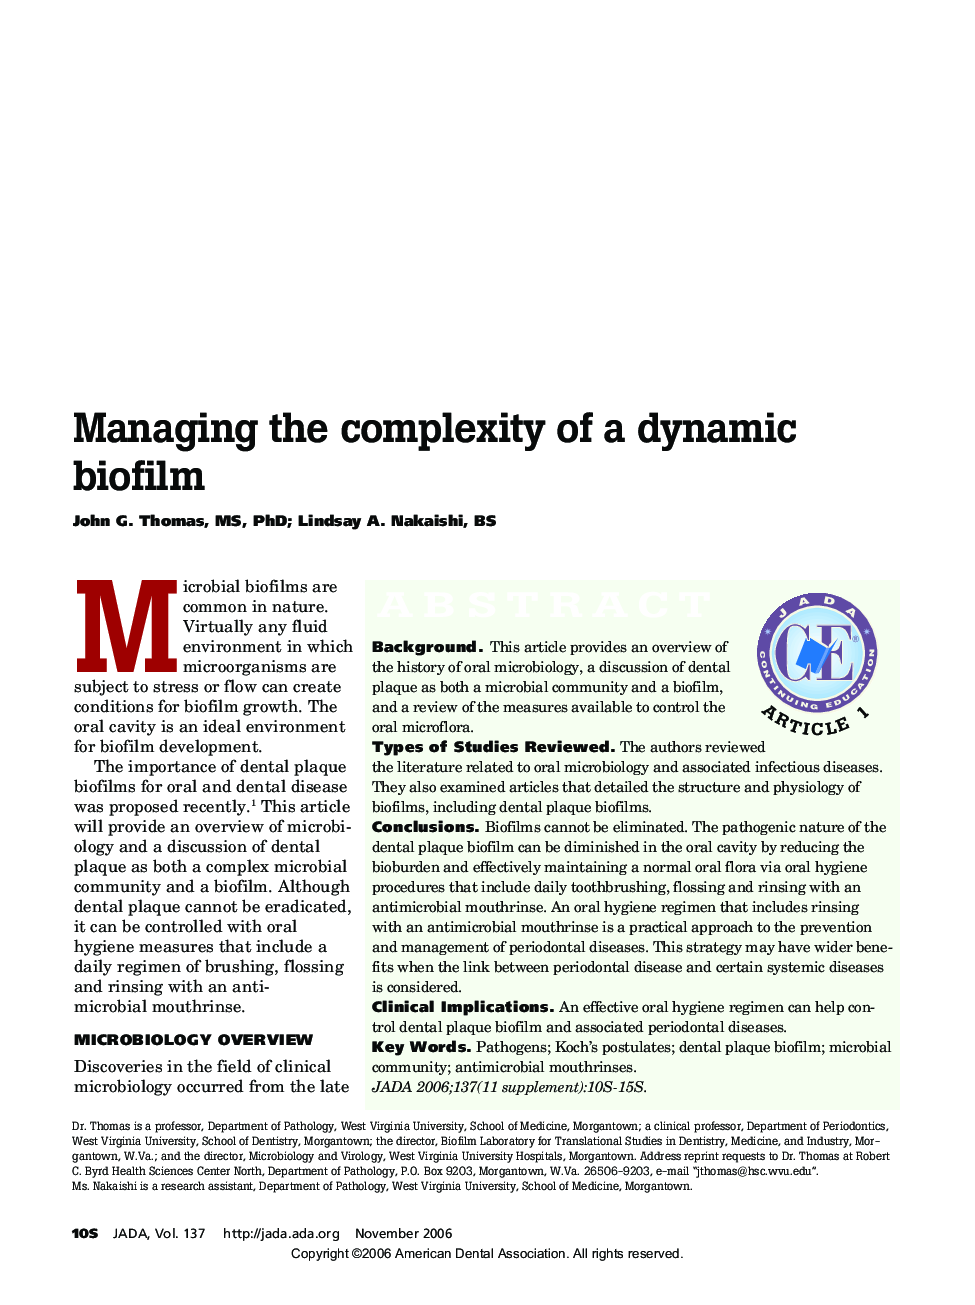 Managing the complexity of a dynamic biofilm